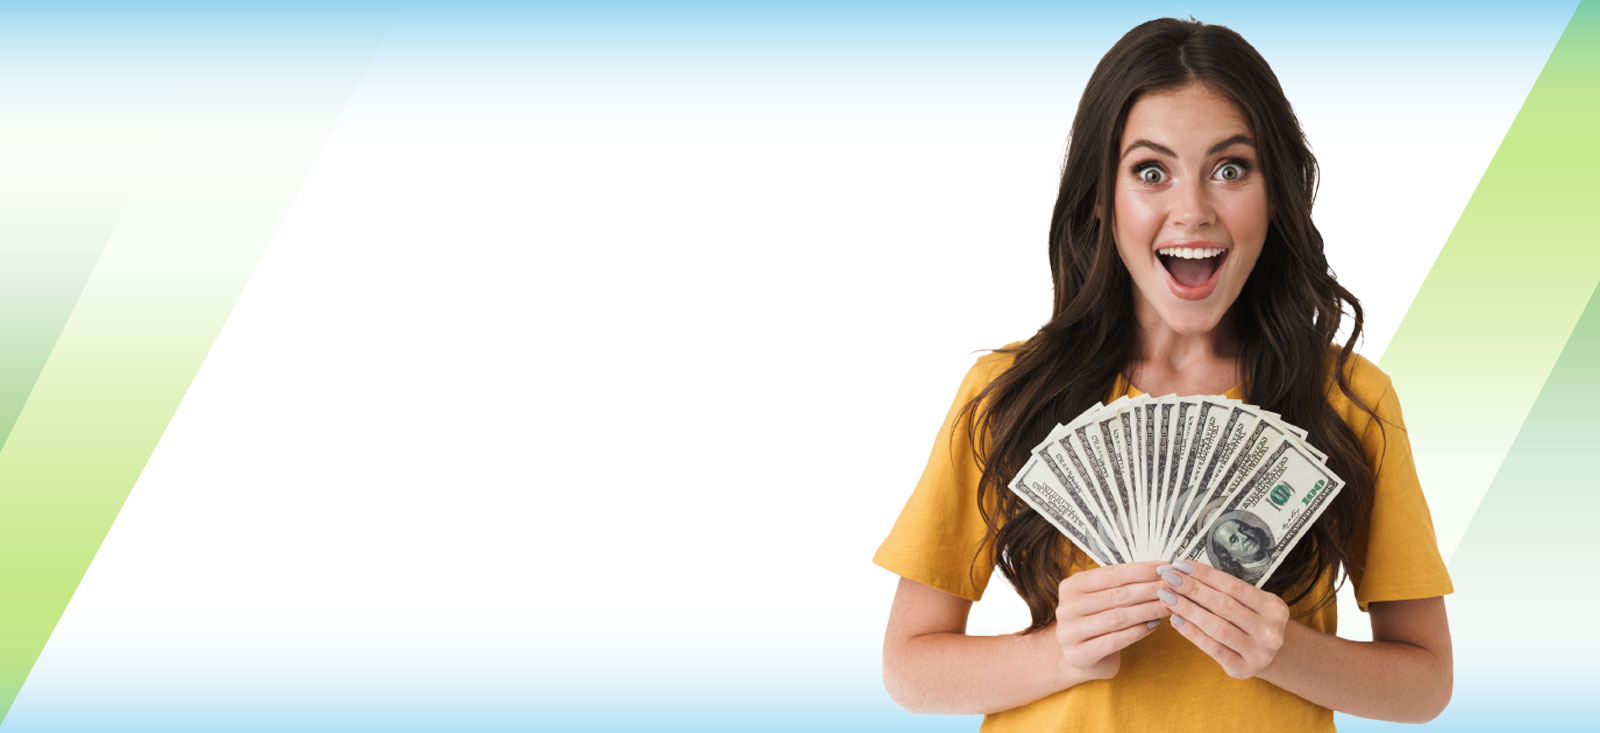 Excited woman holding dollar bills fanned out